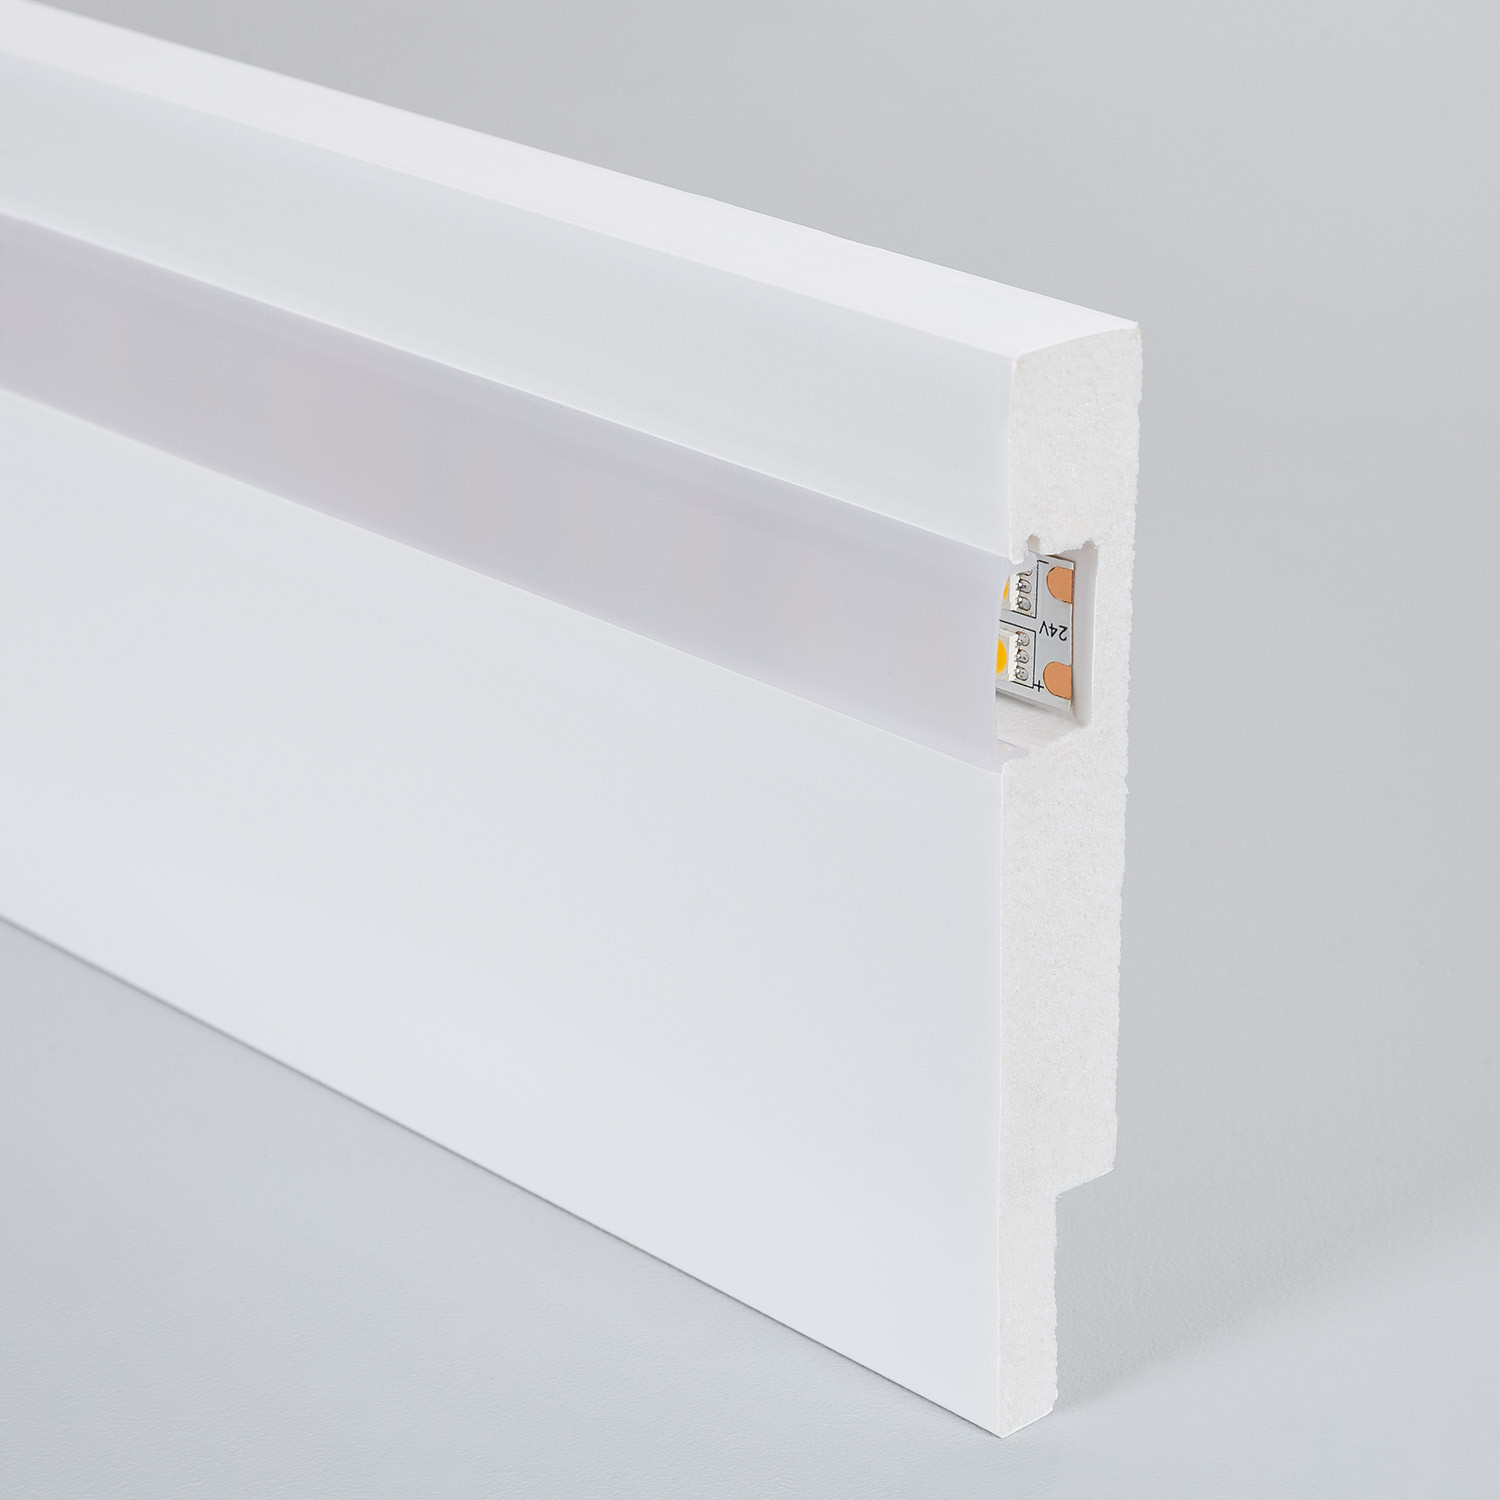 LED Skirting Board With Lights / Lighting in UK